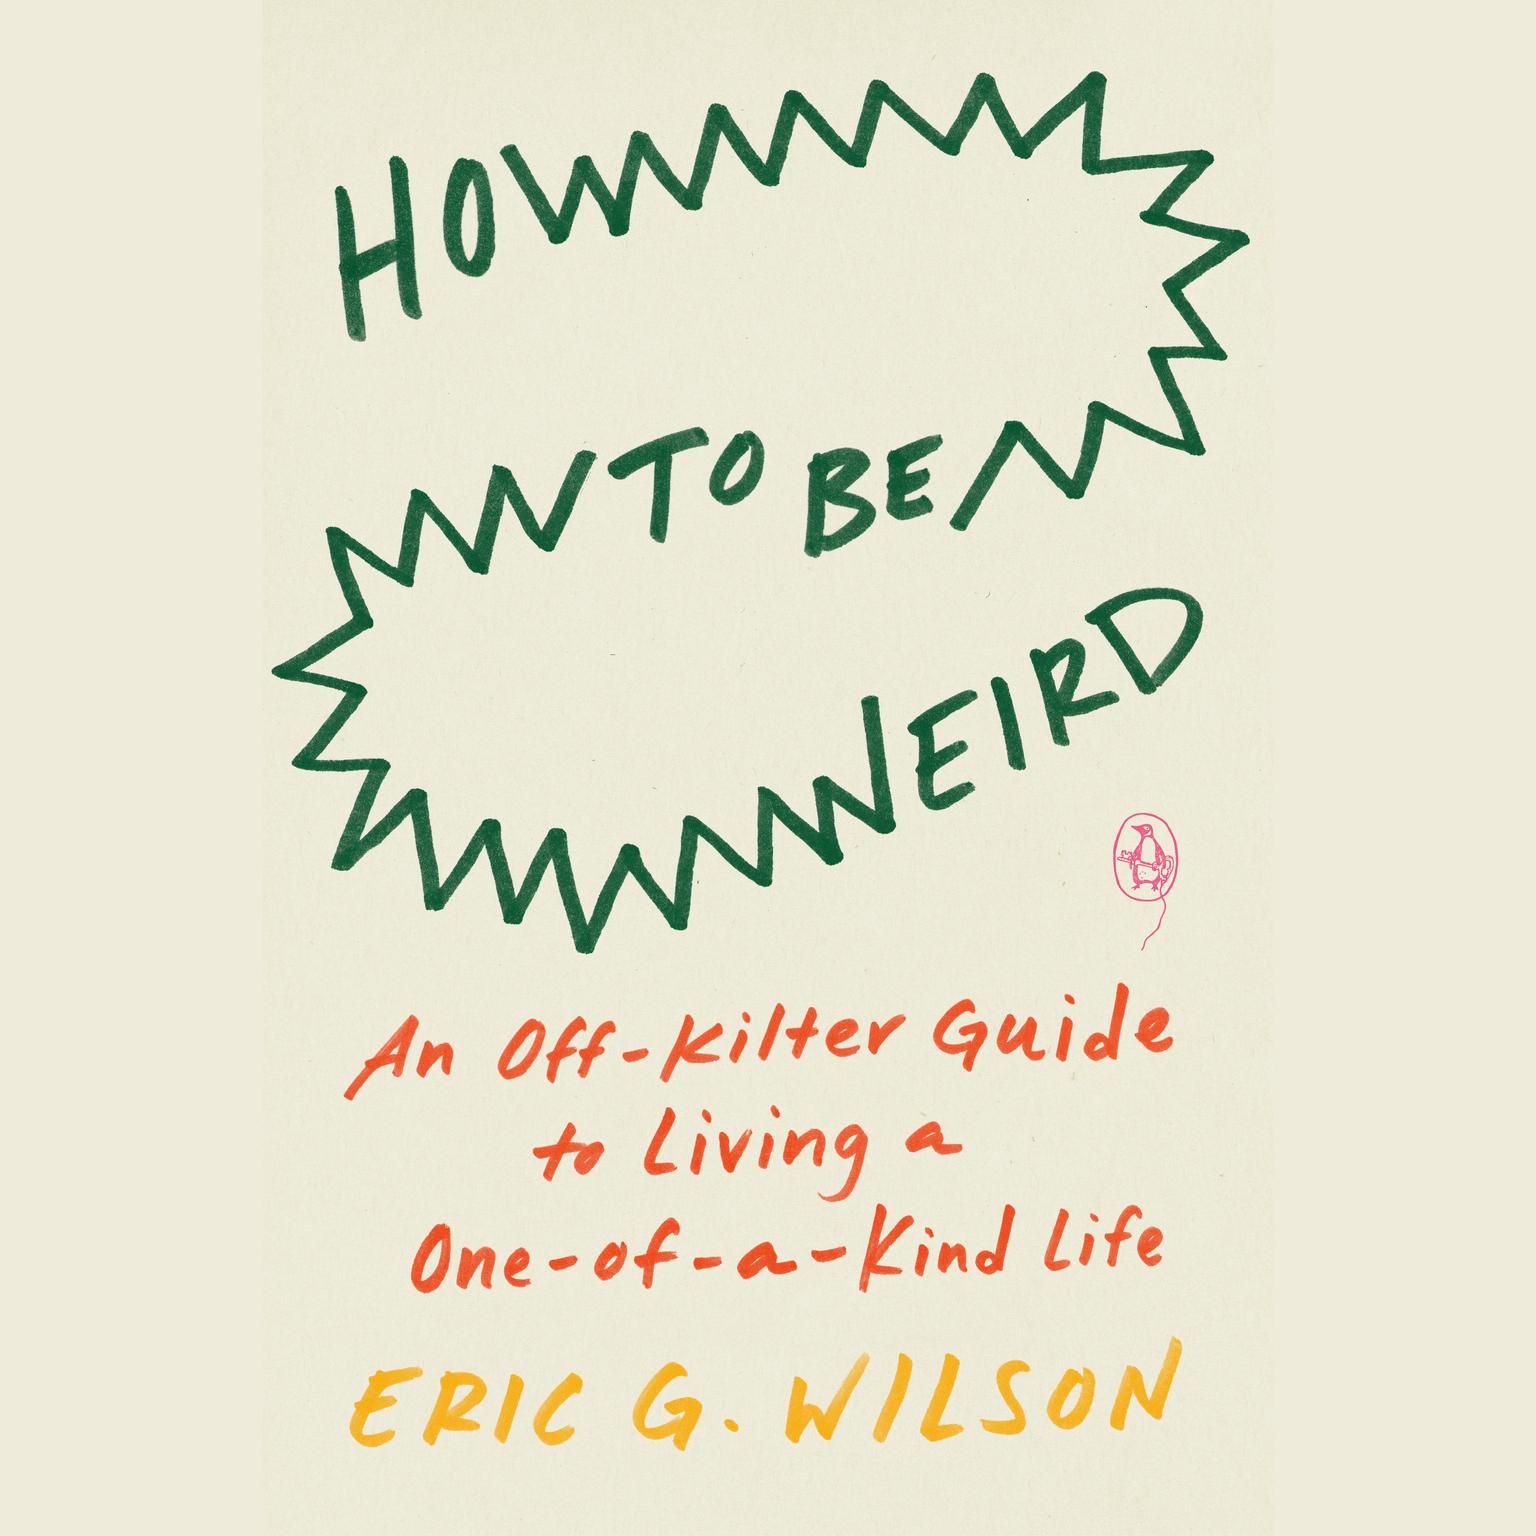 How to Be Weird: An Off-Kilter Guide to Living a One-of-a-Kind Life Audiobook, by Eric G. Wilson